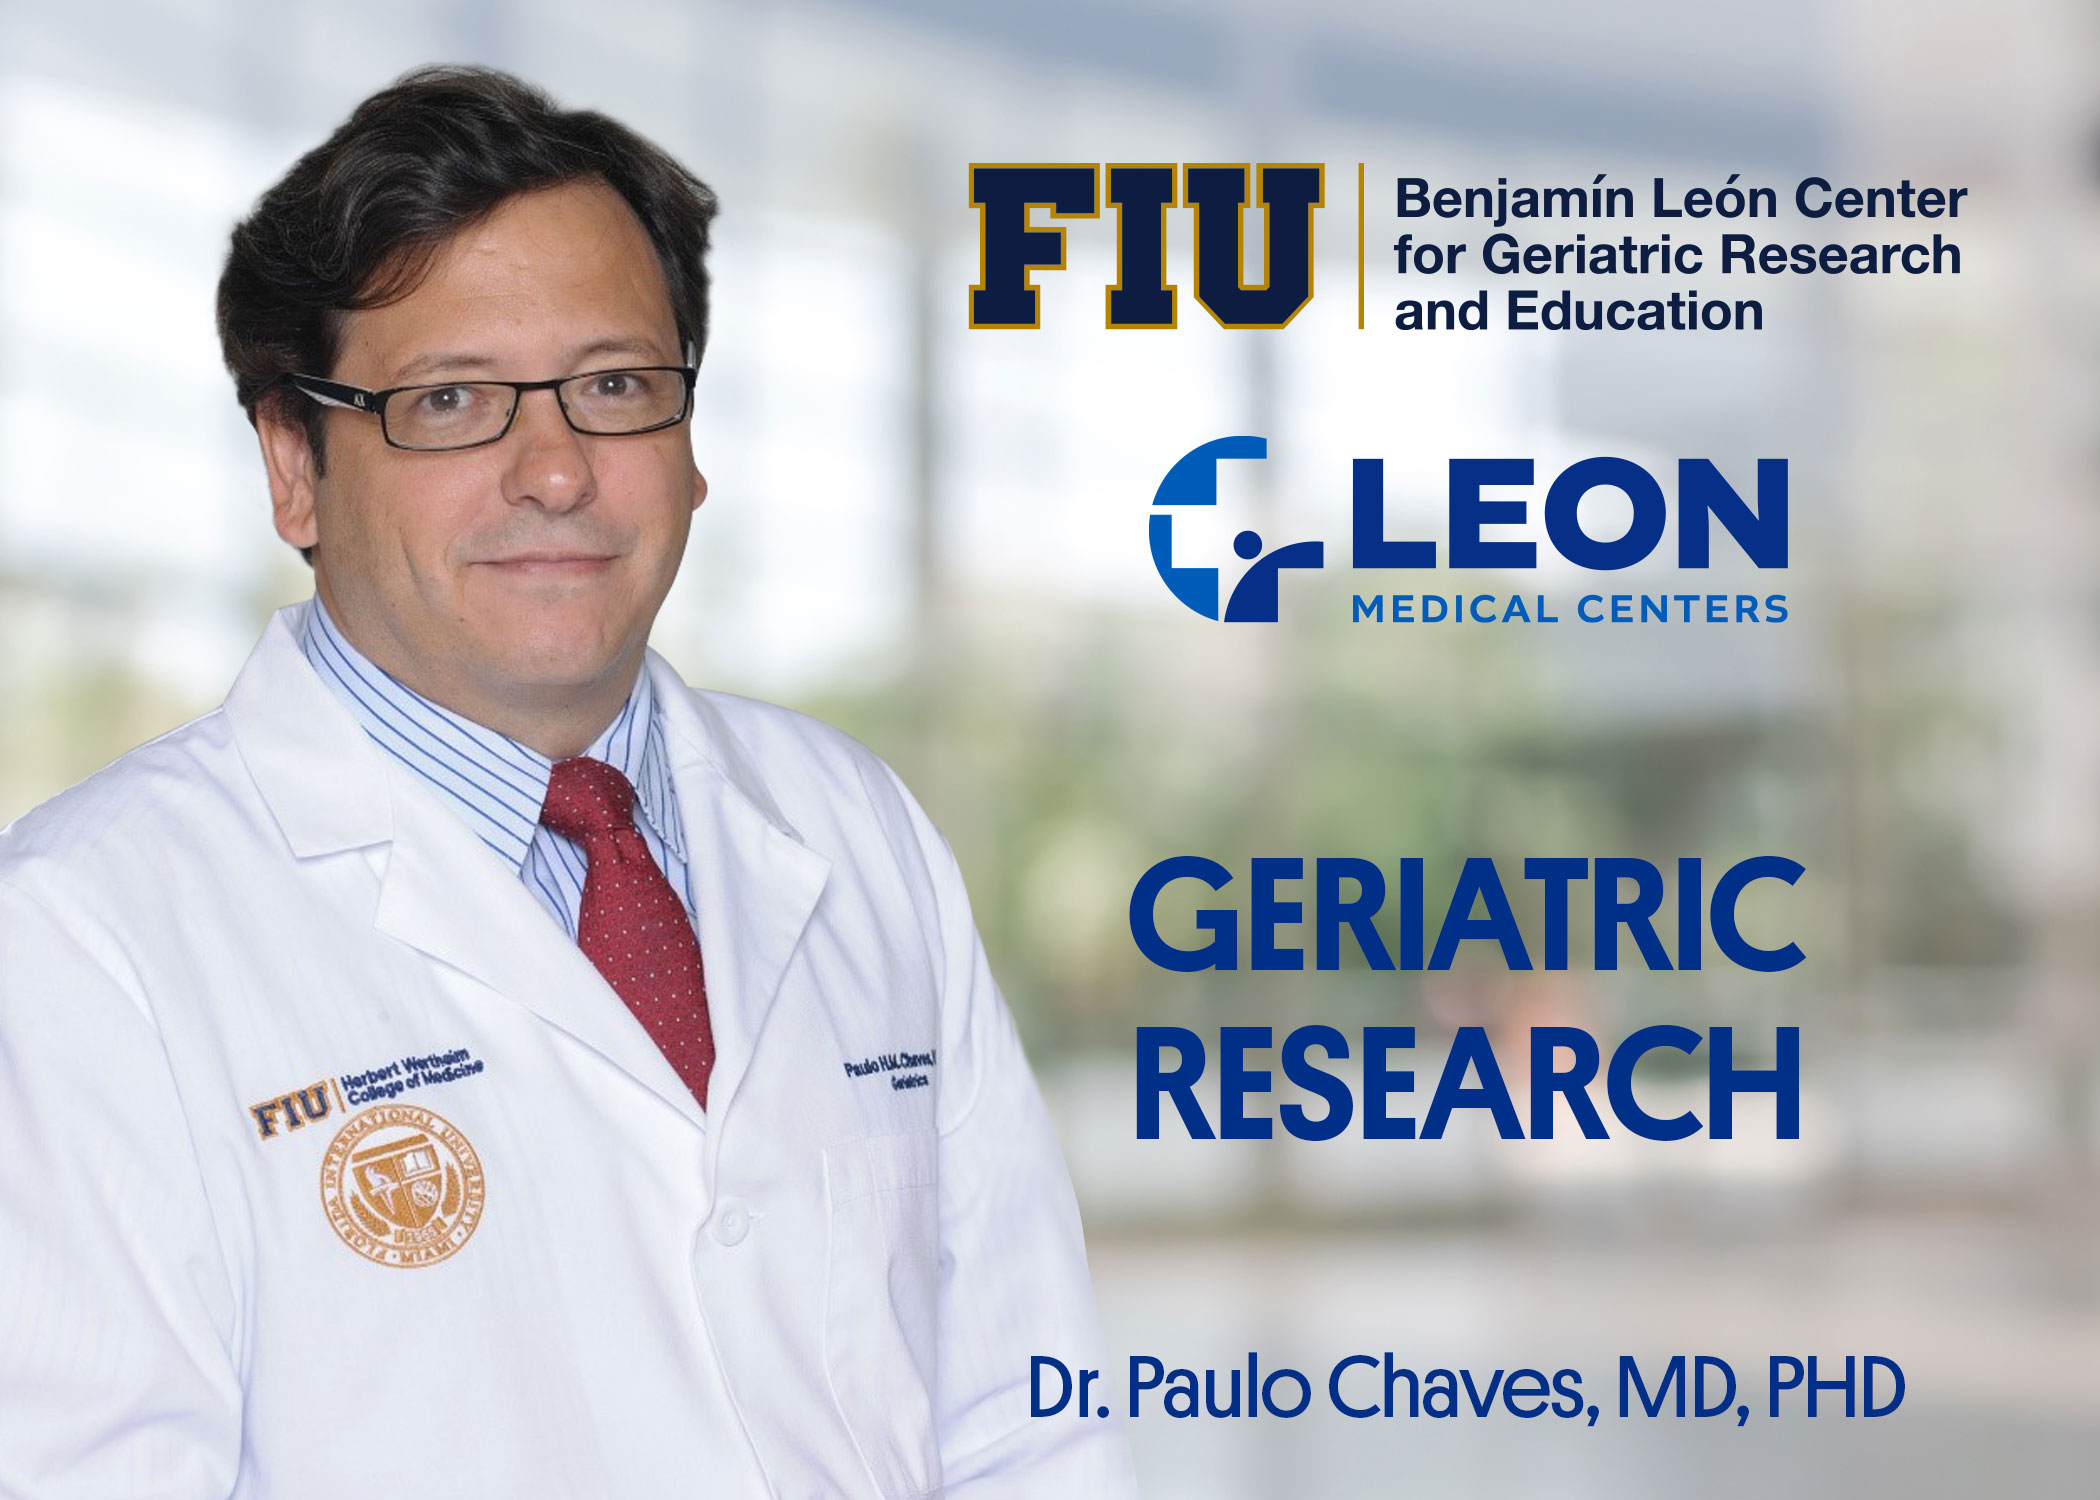 Dr. Paulo Chaves, MD, PHD, Geriatric Research